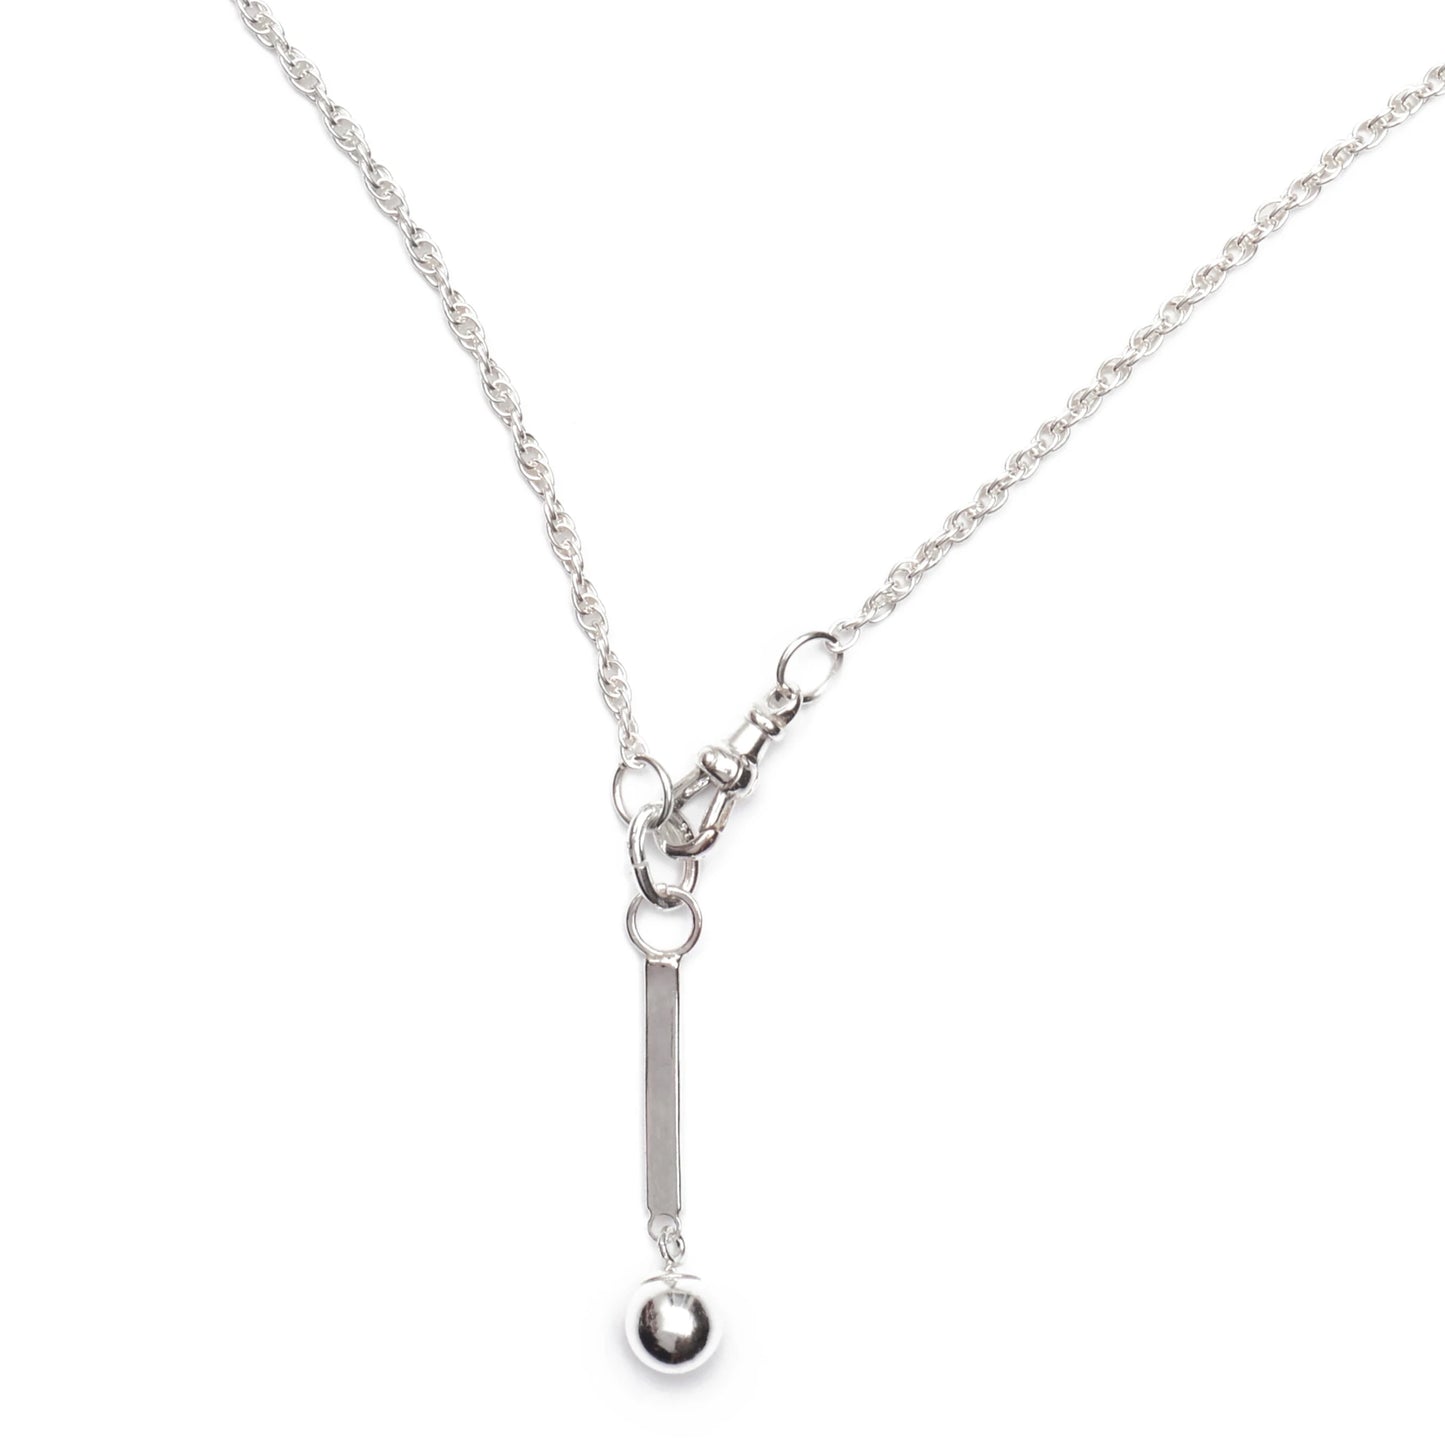 Drop Pendant Necklace - Sterling Silver